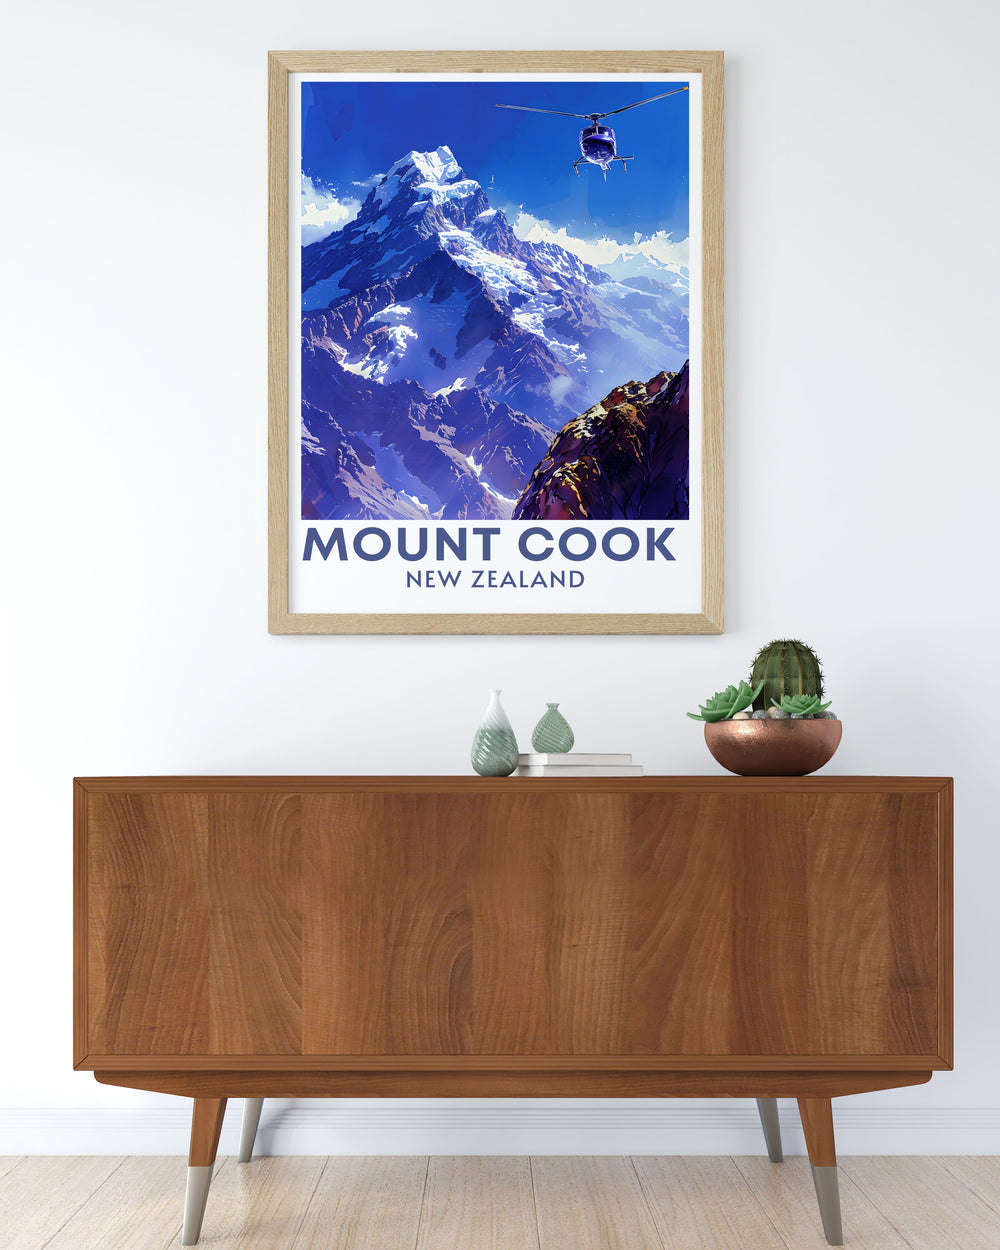 Beautiful Mt Cook prints capturing the serene landscapes of South Island NZ these New Zealand wall art pieces are ideal for nature enthusiasts and those seeking unique and captivating home decor inspired by iconic natural landmarks